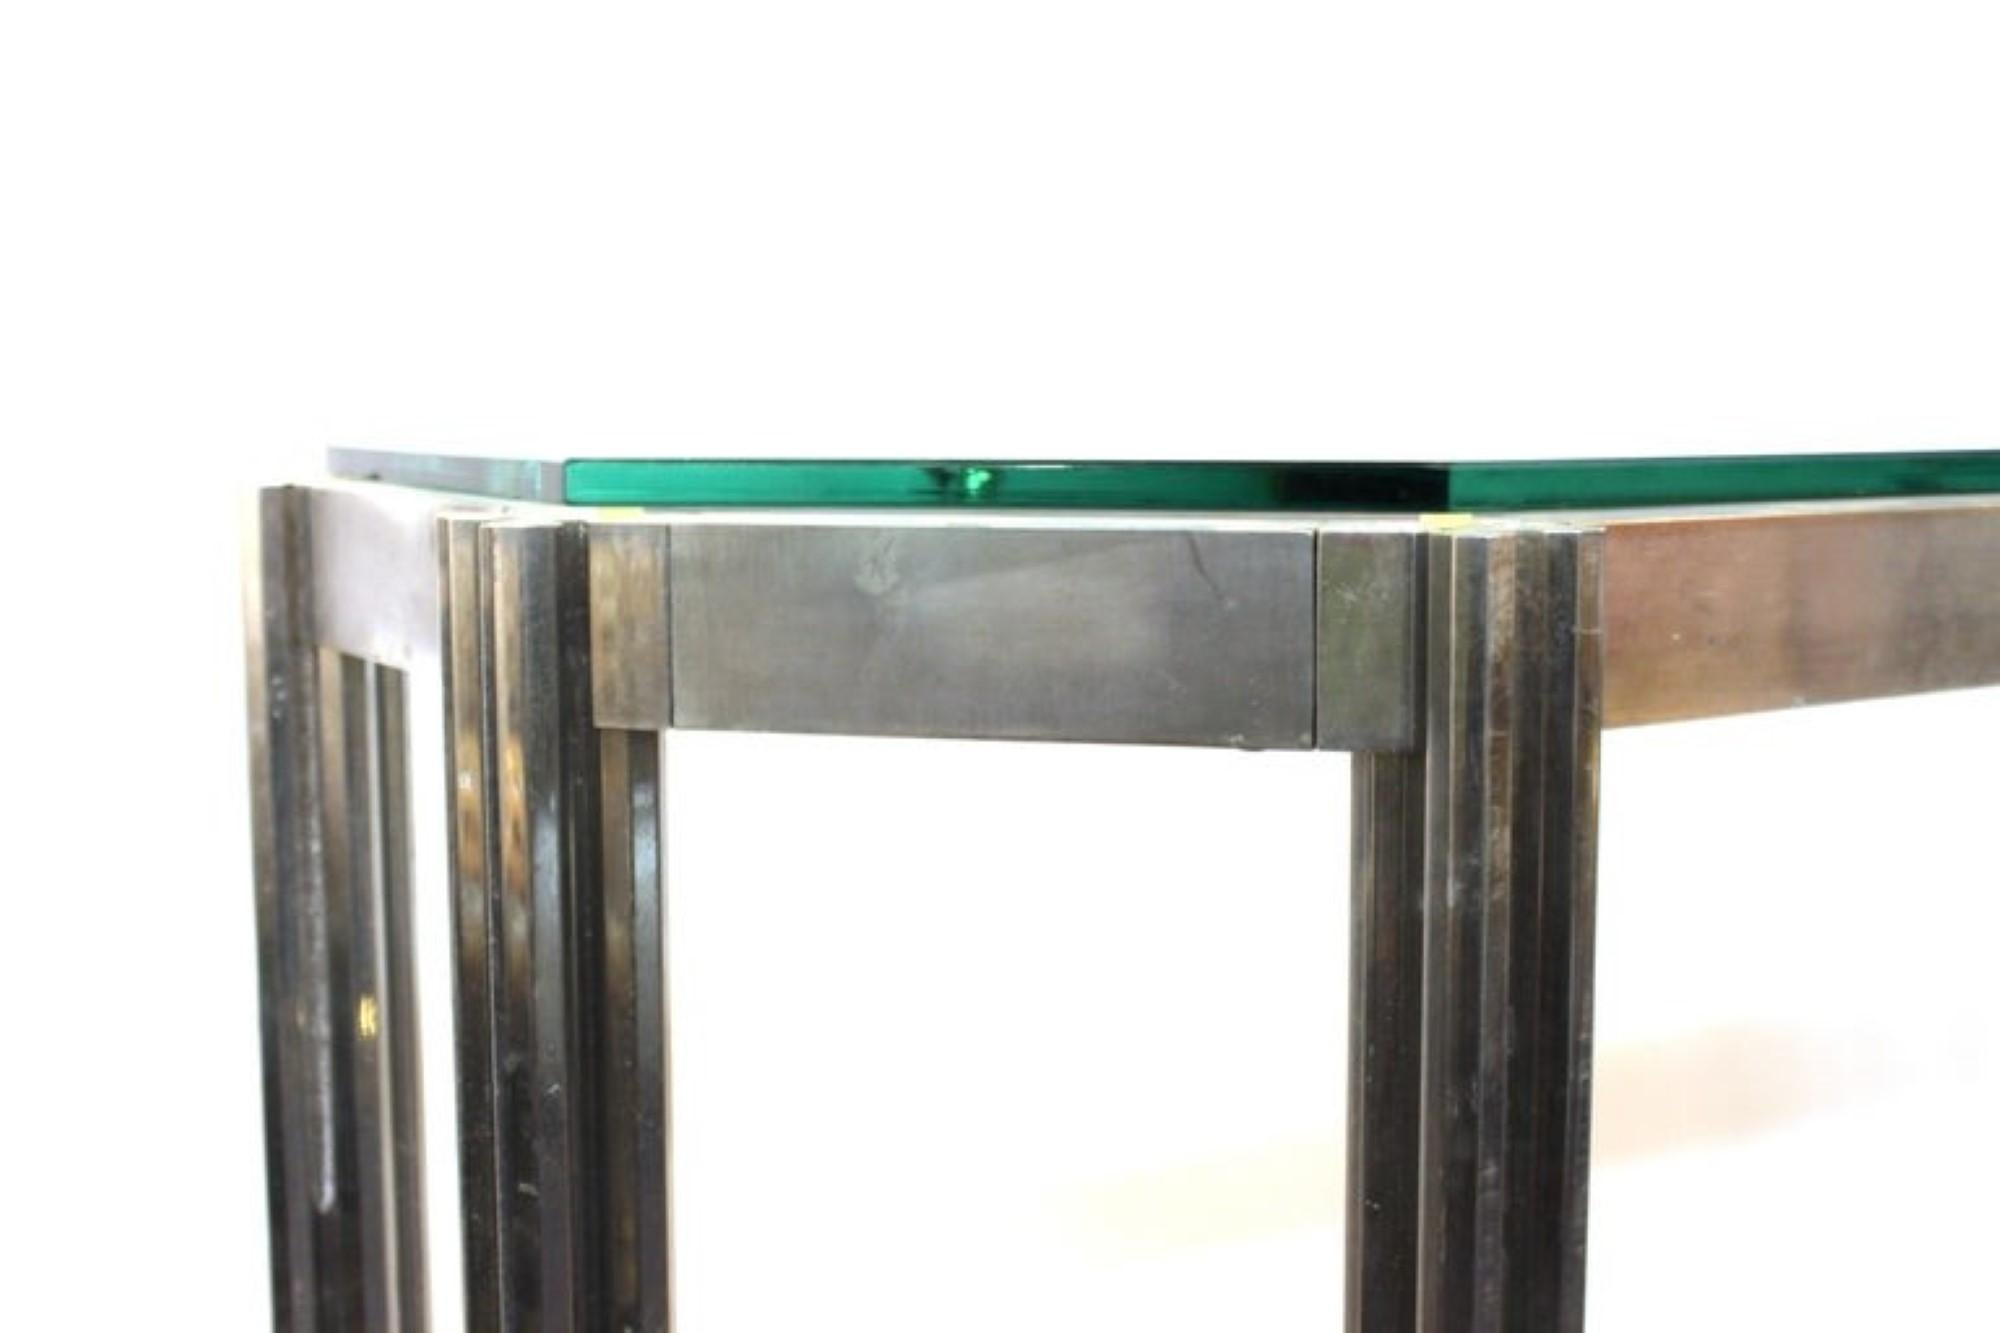 Alessandro Albrizzi Mid-Century Modern Chrome Console Table

Design: Chrome console table with glass top, featuring an articulated frame and six octagonal bar legs.

Dimensions: 35